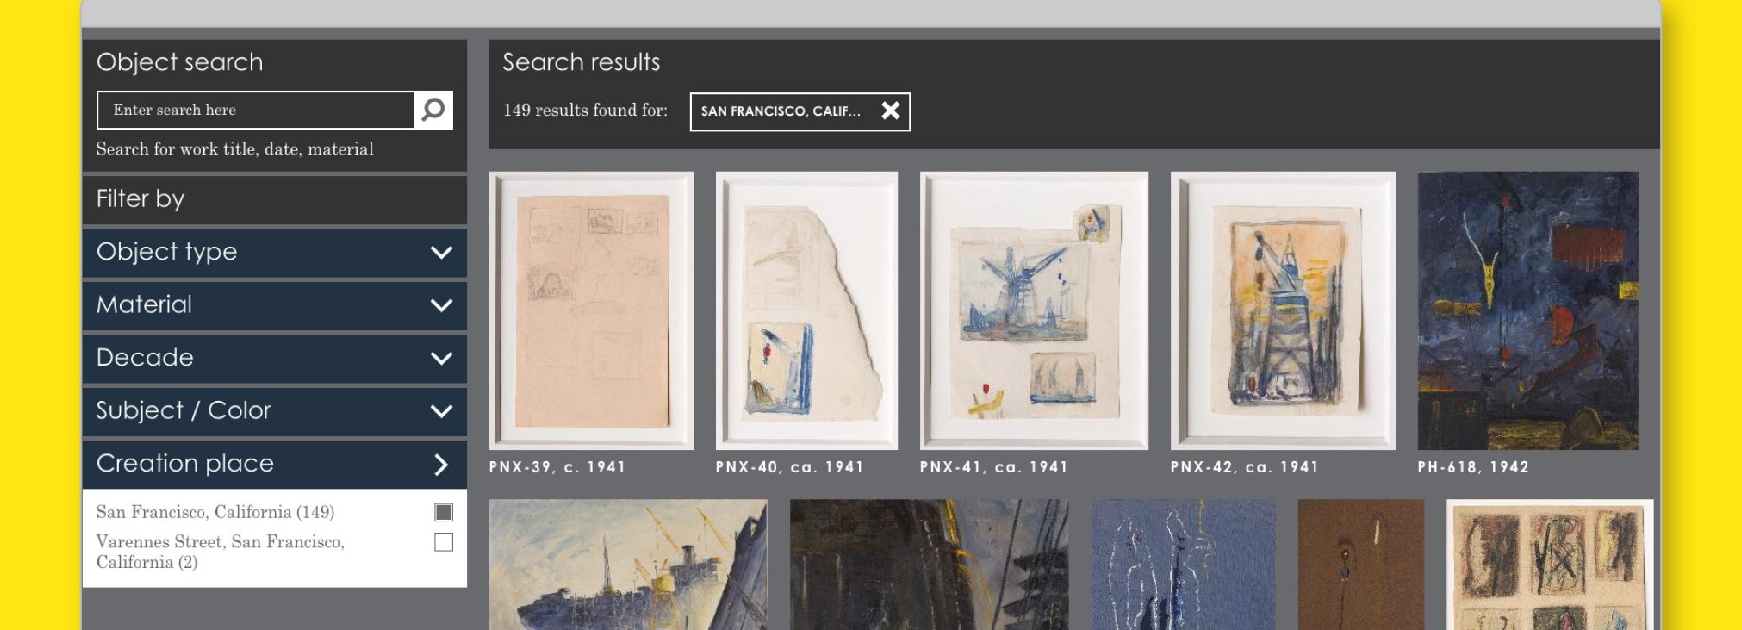 Screenshot of the Clyfford Still Museum's online collection with thumbnails of artworks